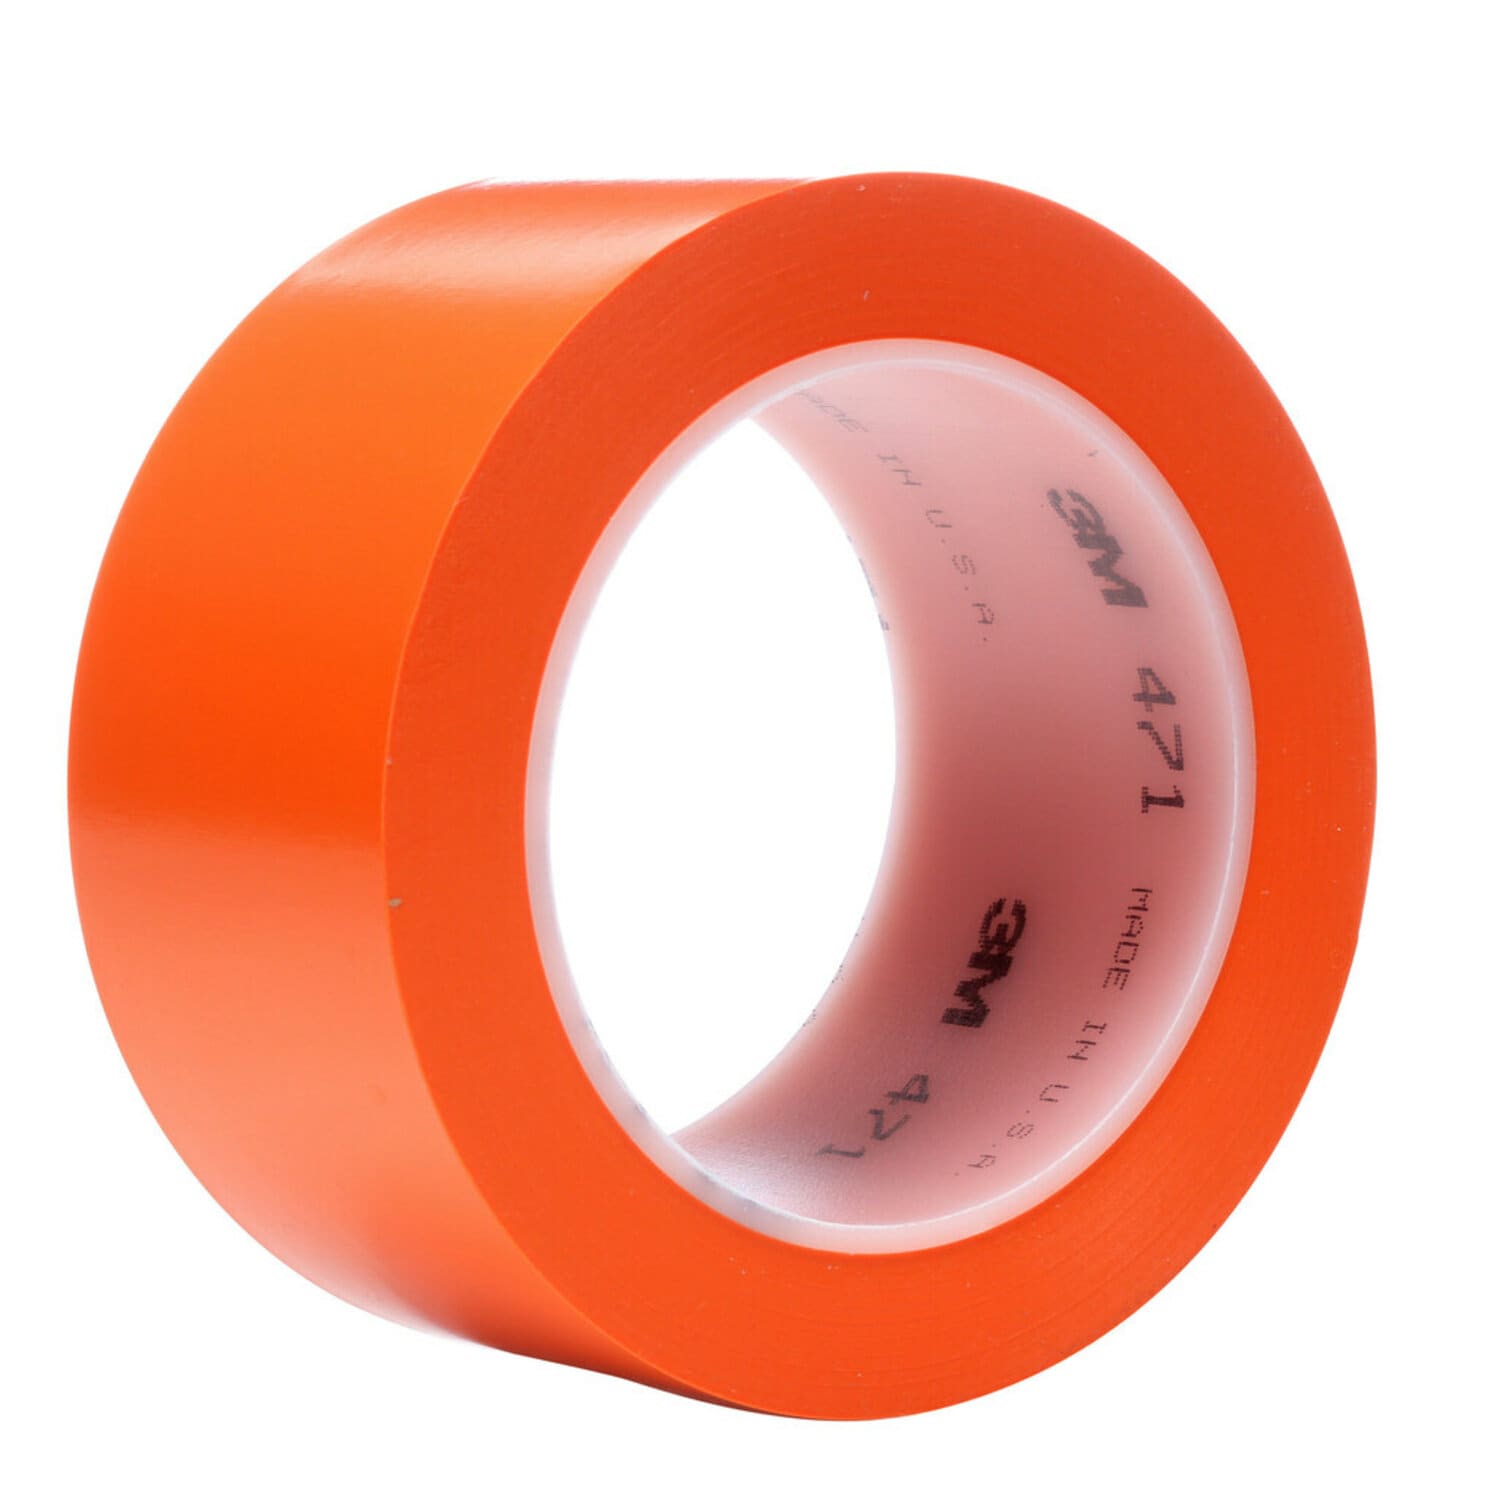 7100044623 - 3M Vinyl Tape 471, Orange, 1 in x 36 yd, 5.2 mil, 36 rolls per case,
Individually Wrapped Conveniently Packaged